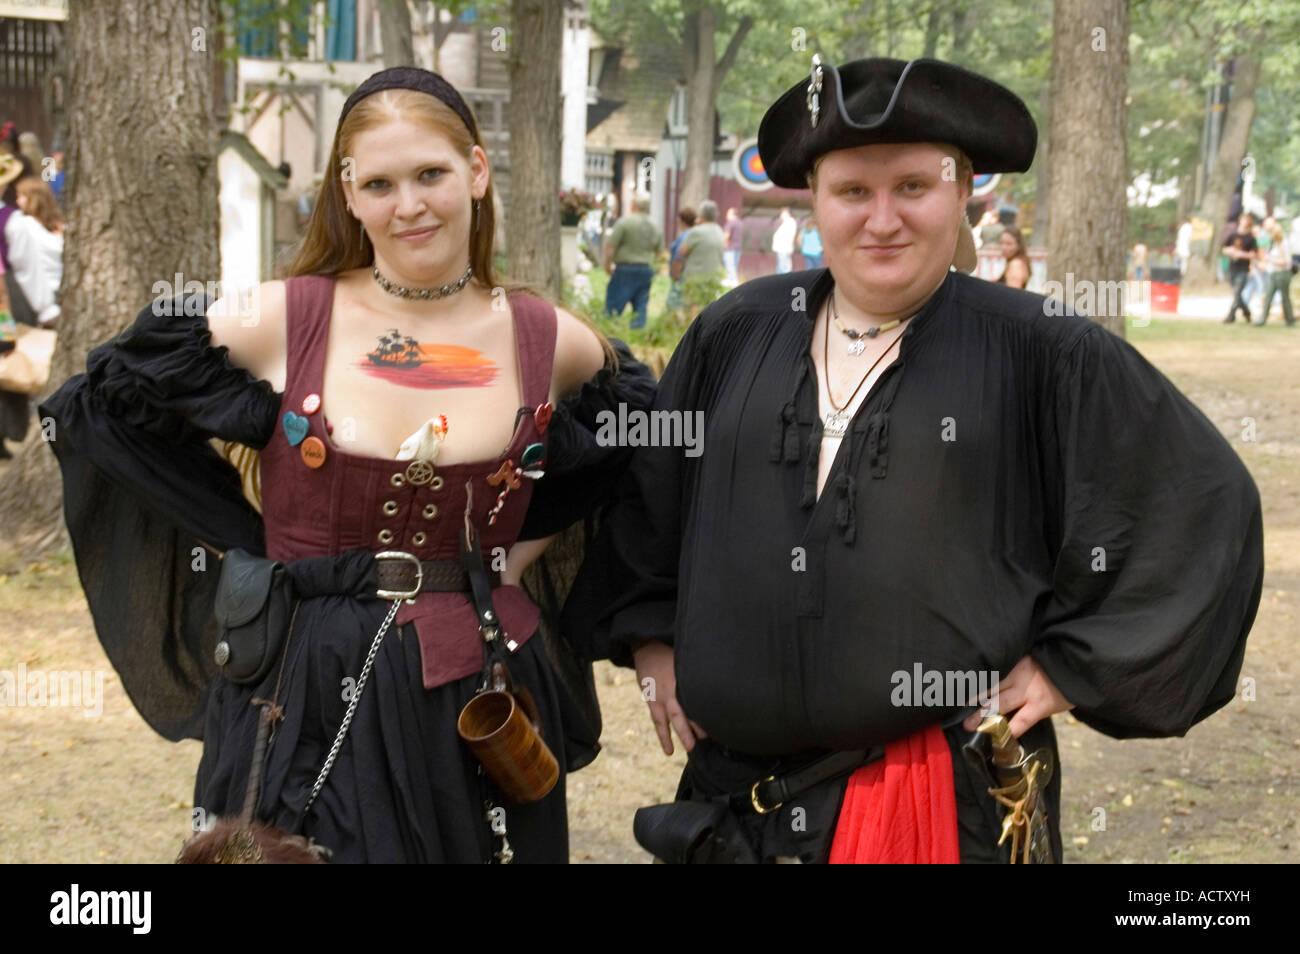 A MAN AND A WOMAN DRESSED UP AS OLD EUROPEAN COUPLE AT RENAISSANCE FAIR IN BRISTOL, WISCONSIN Stock Photo